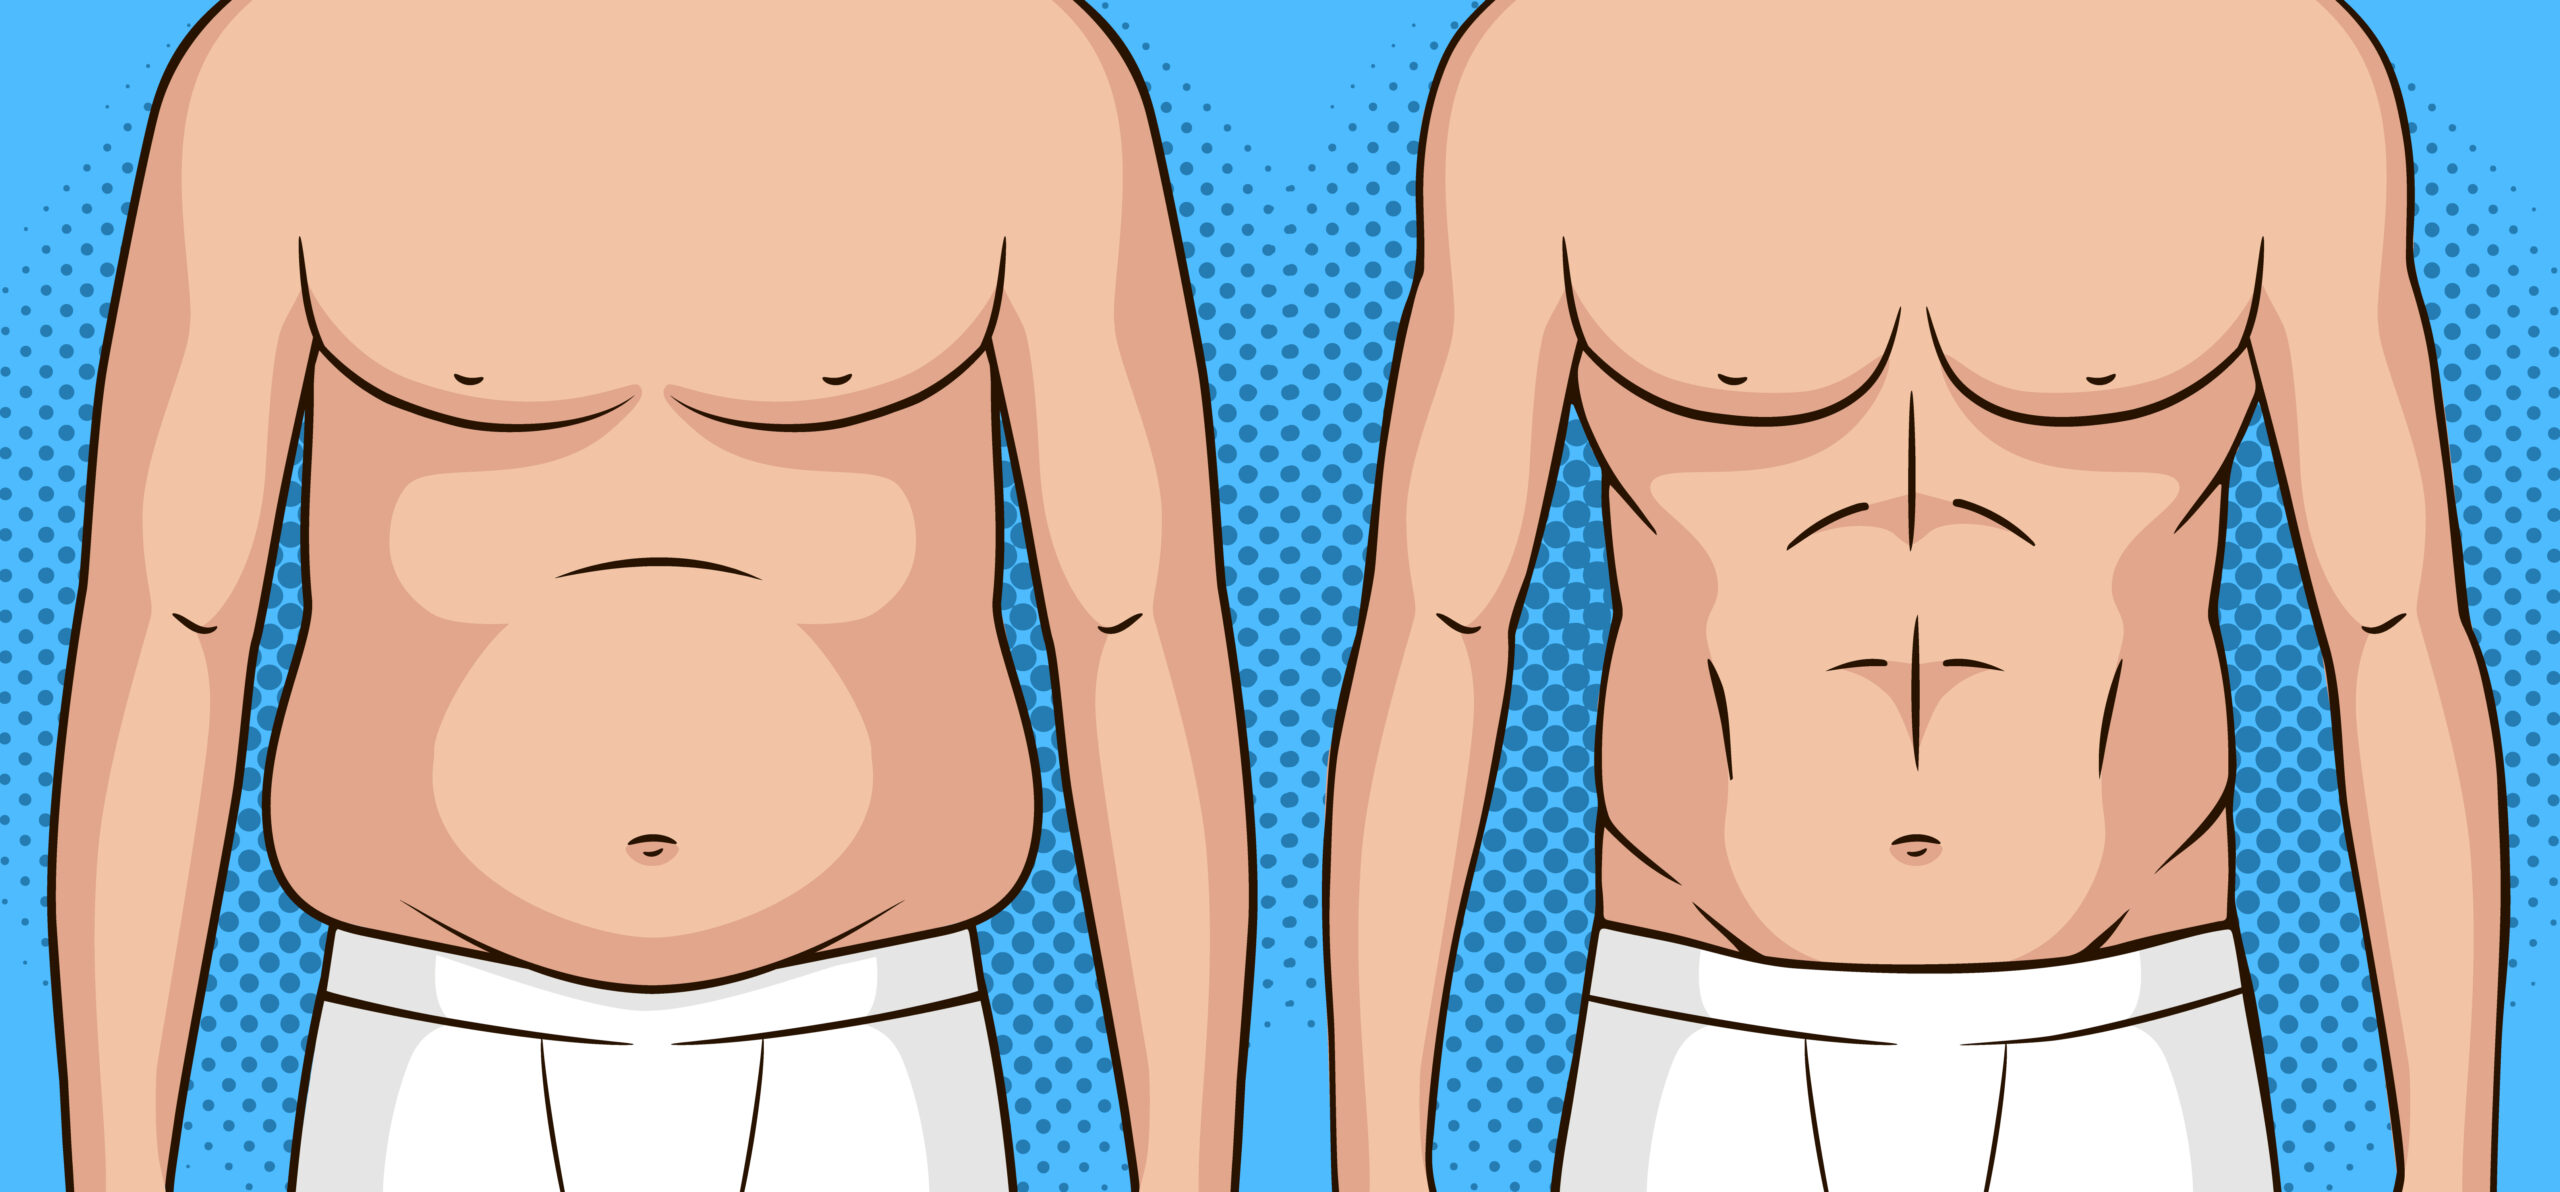 Color vector pop art style illustration of a man before and after weight loss. Flat stomach against the fat belly. 